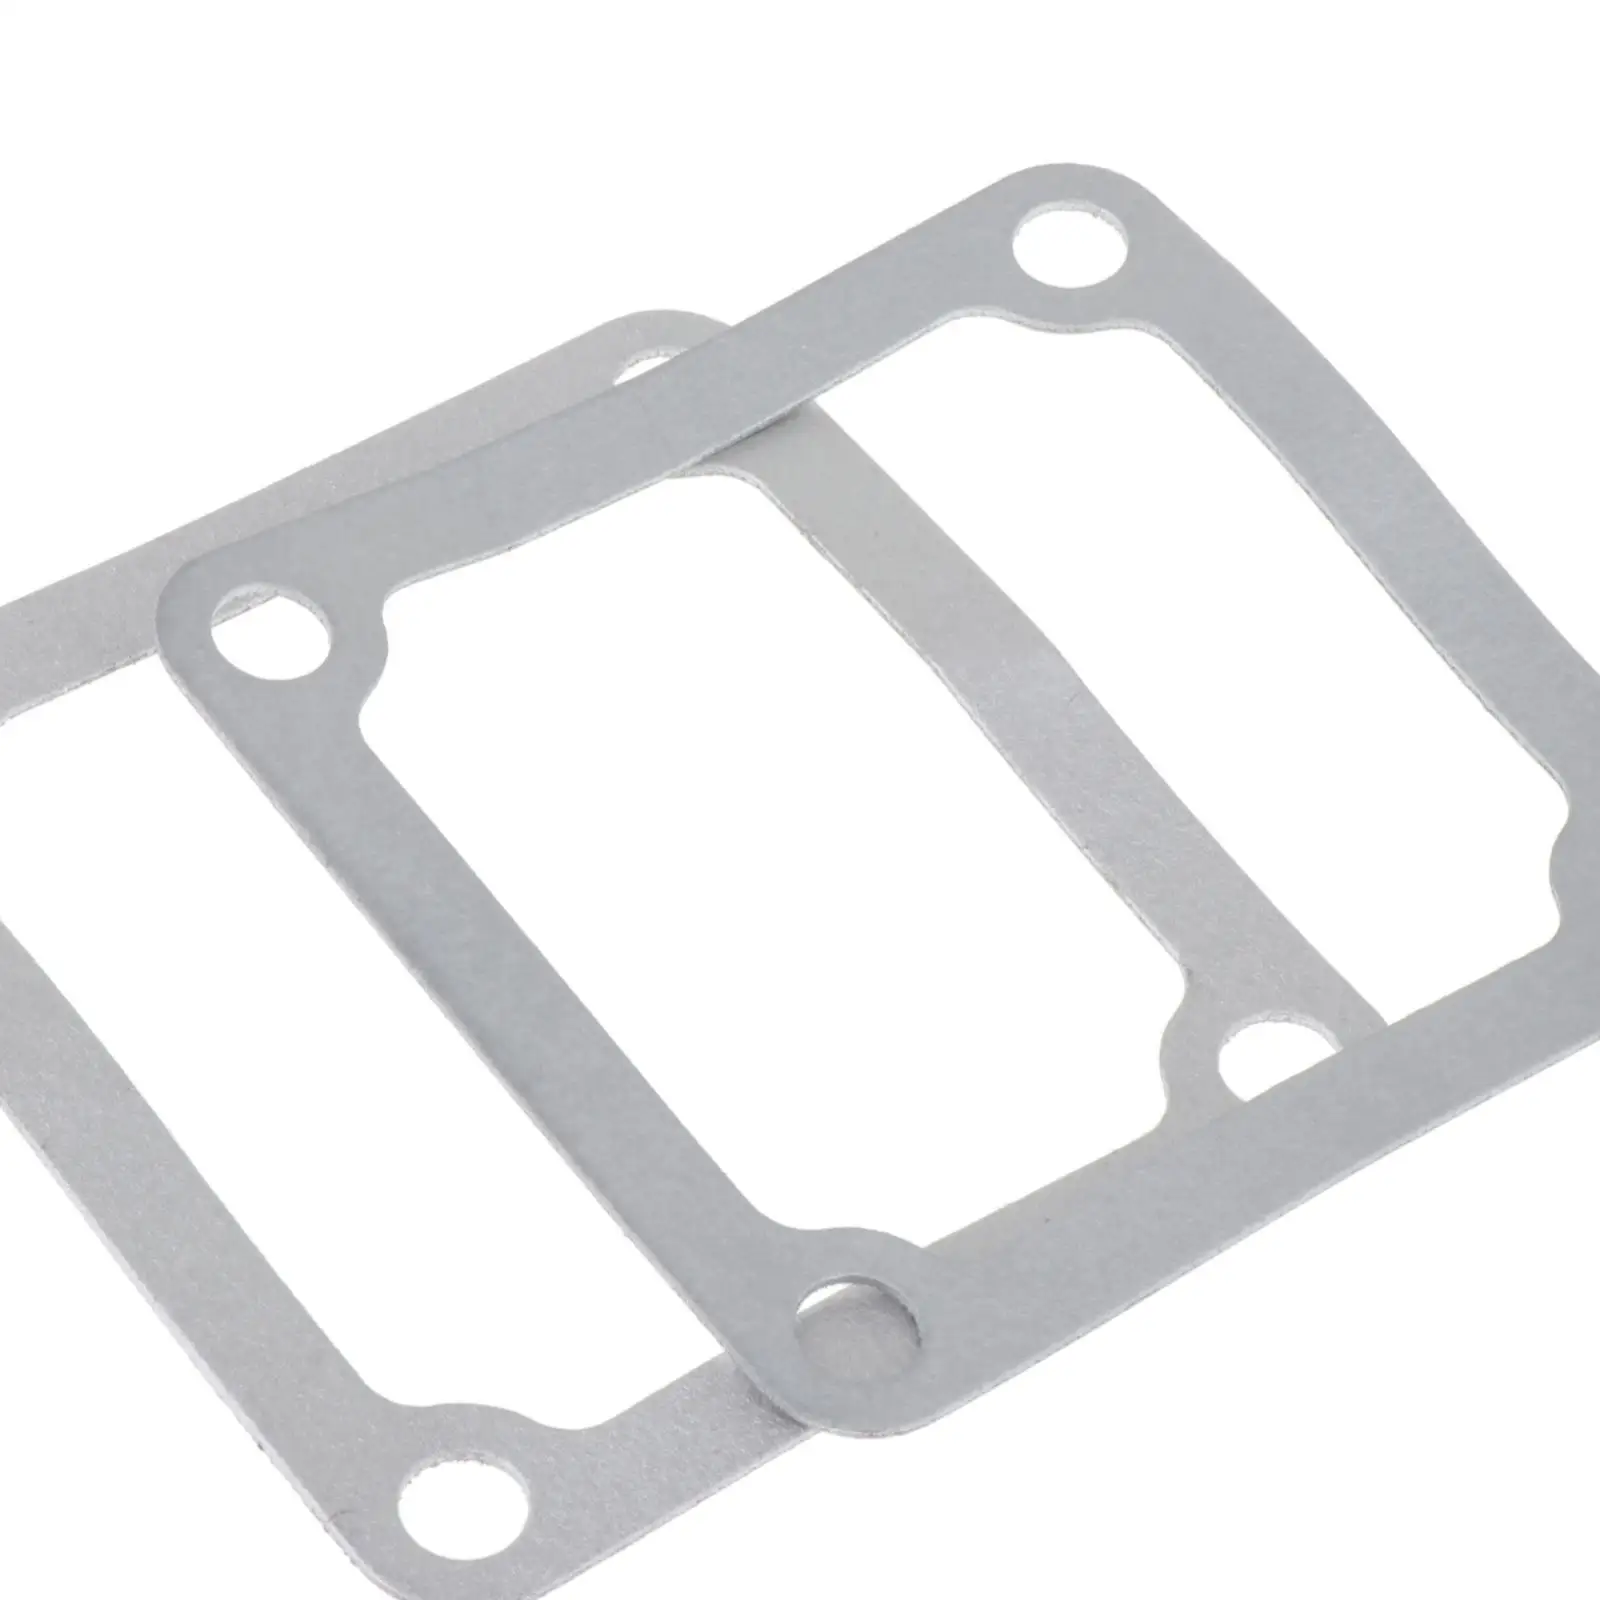 2x Intake Heater Grid Gaskets Auto Parts 93x98mm Direct Replaces Sturdy